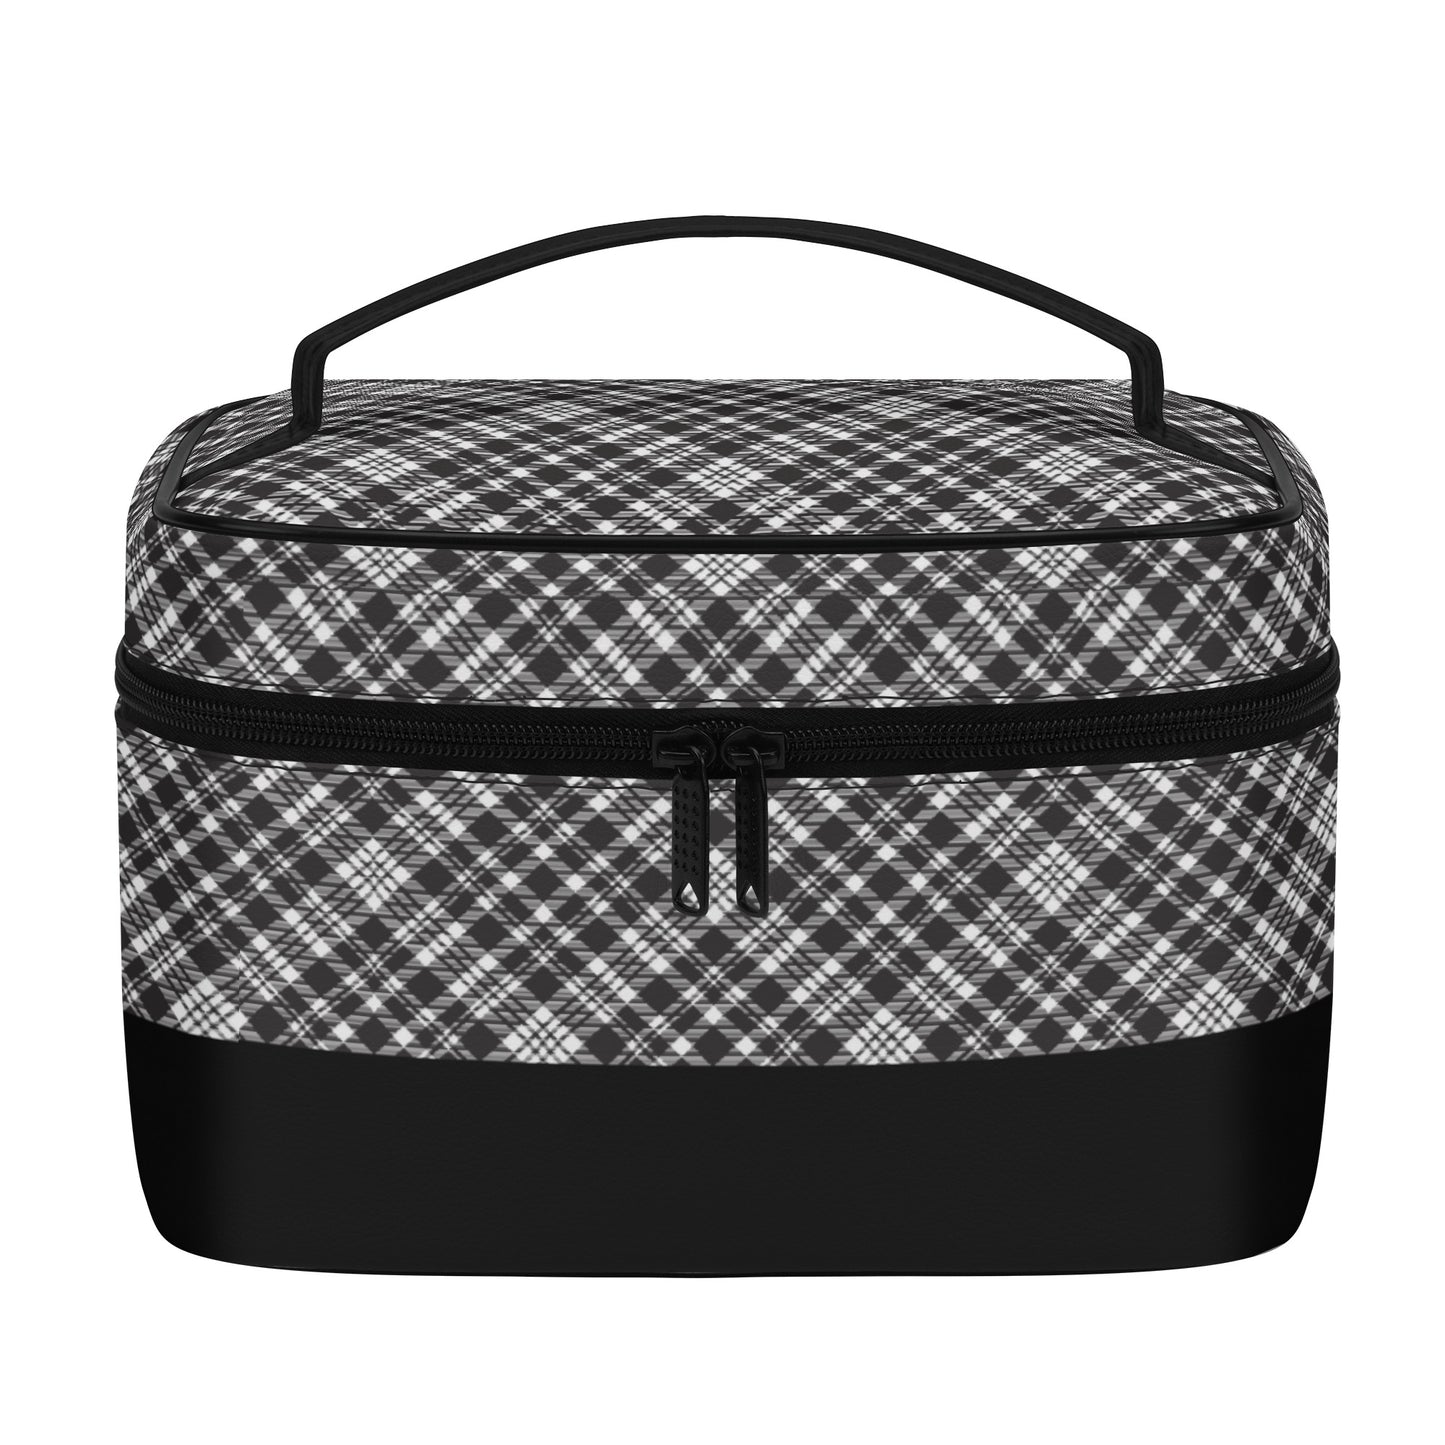 Chic Contrasting Black & Grey Argyle Plaid Pattern  with Black Band - Cosmetic or Toiletry Bag Faux Leather (PU)